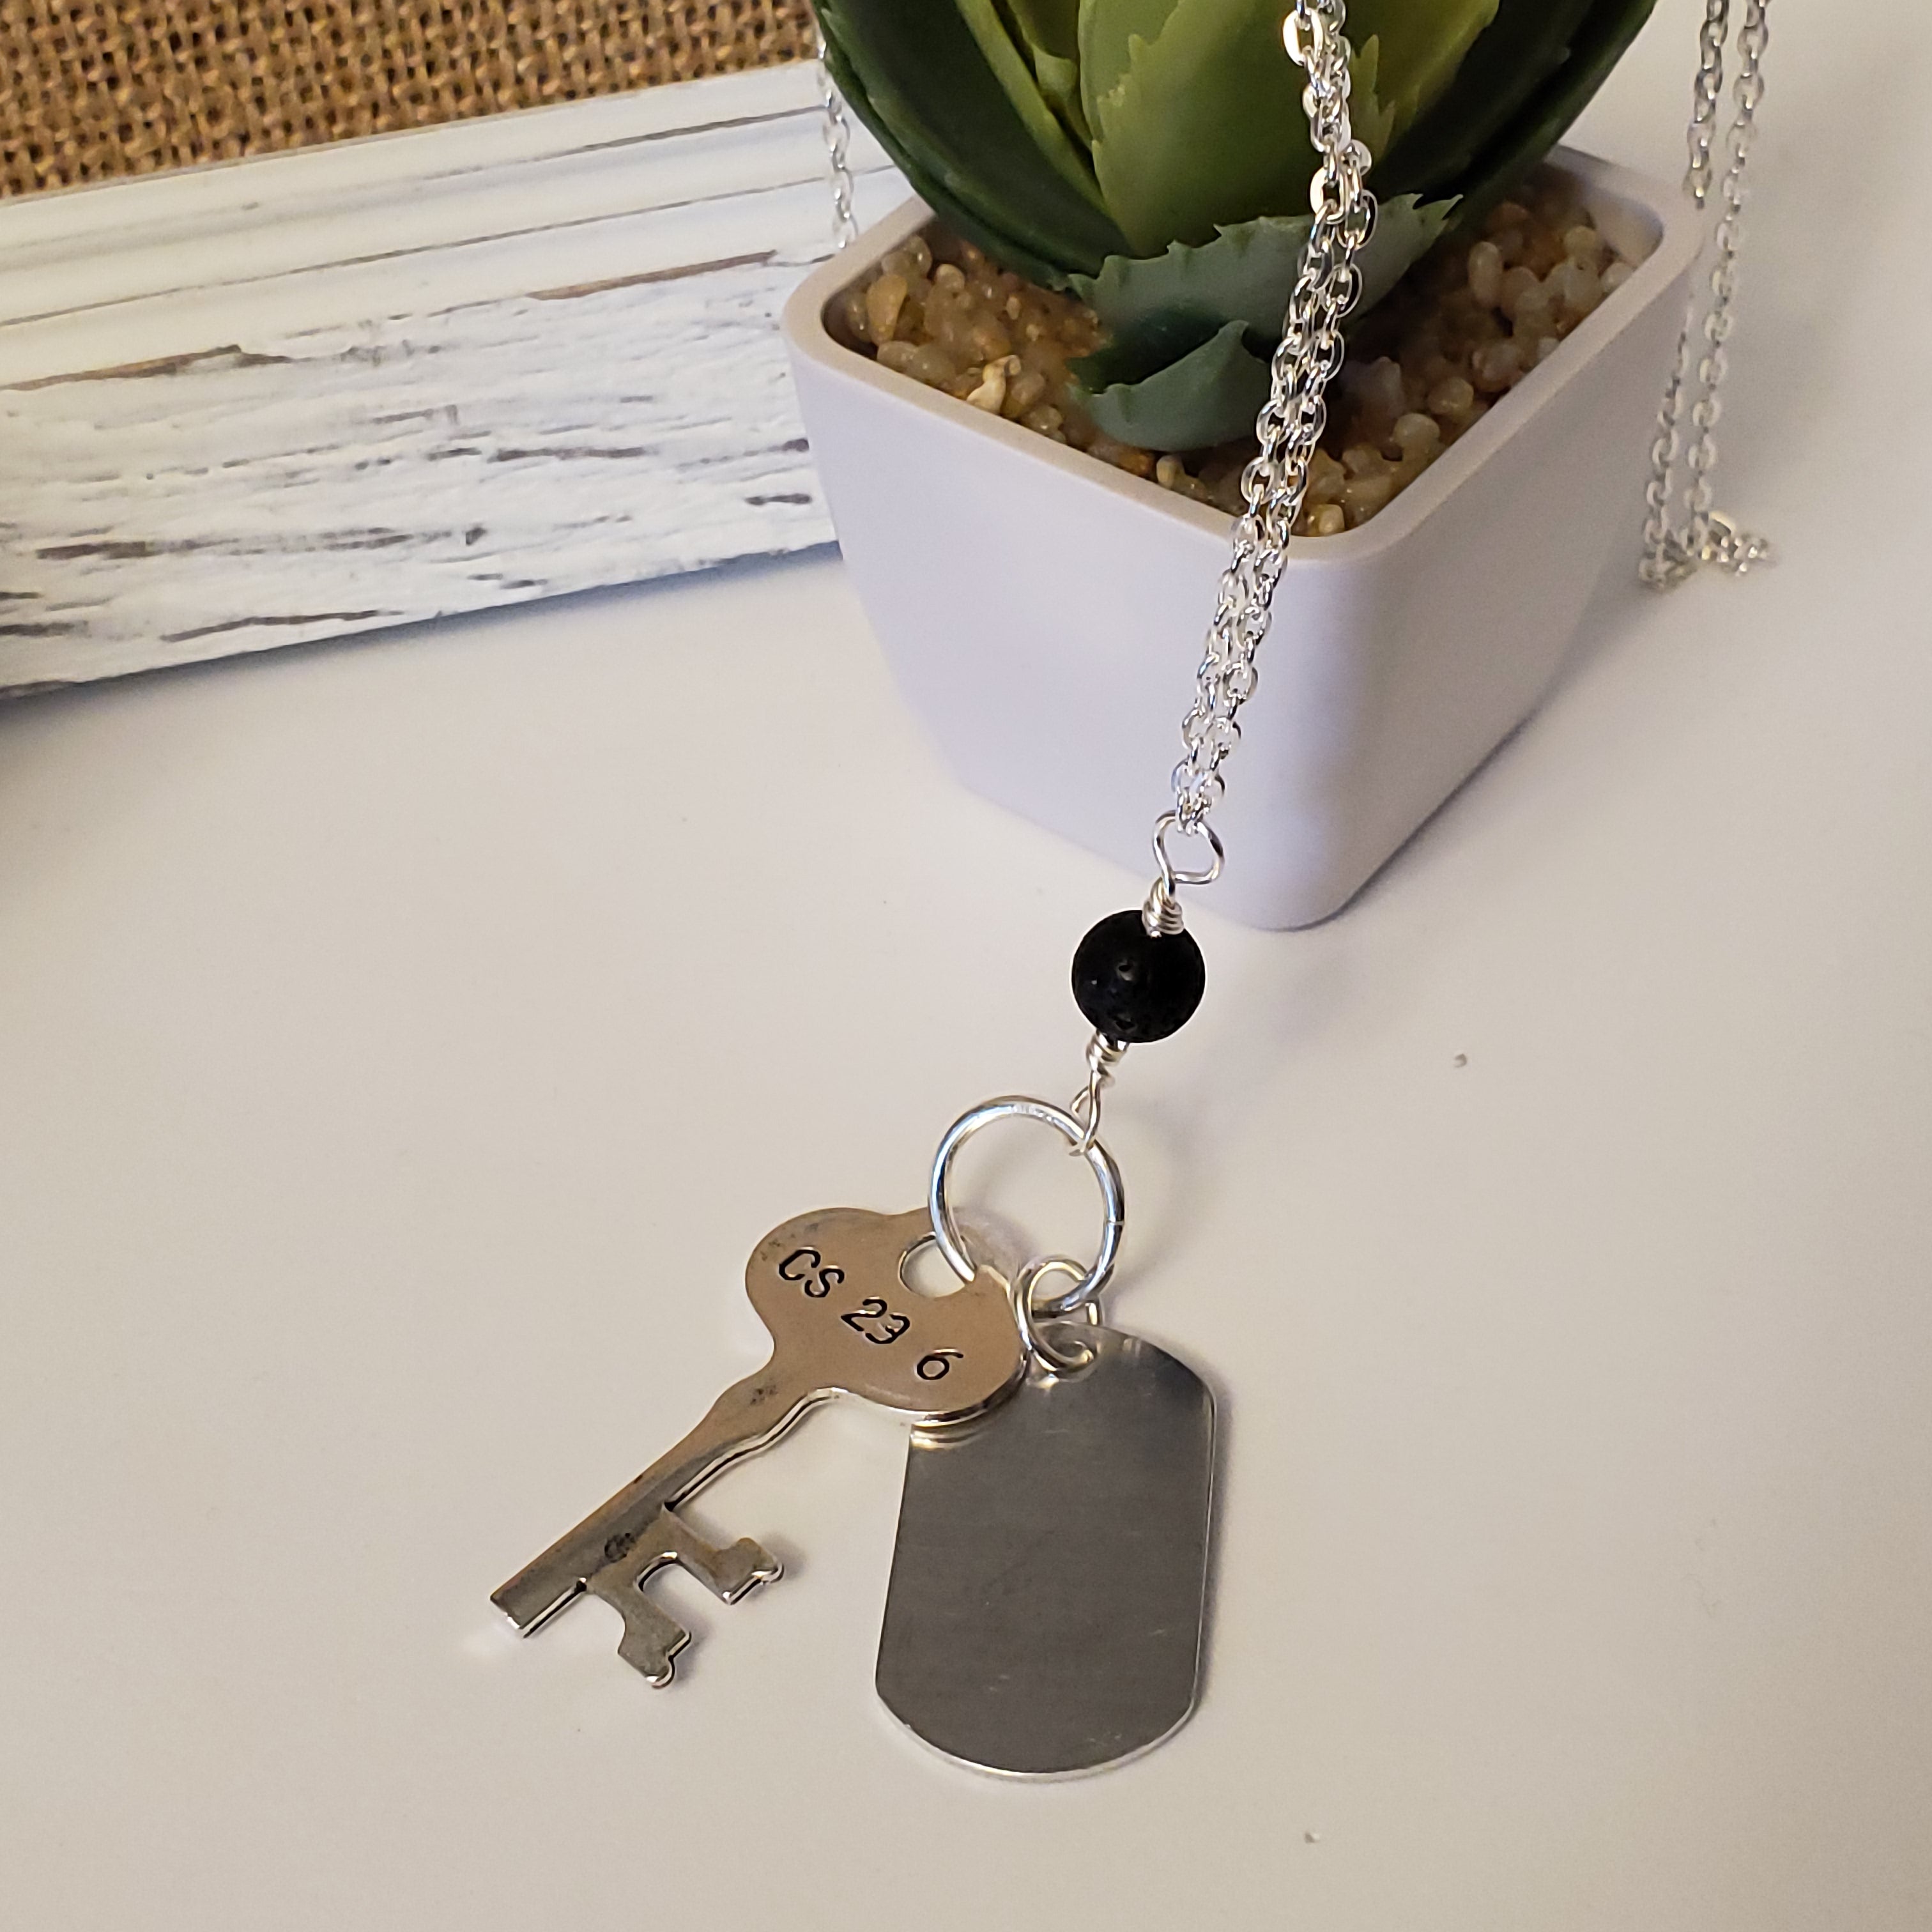 Long chain necklace with key-shaped charm, dog tag and black lava bead